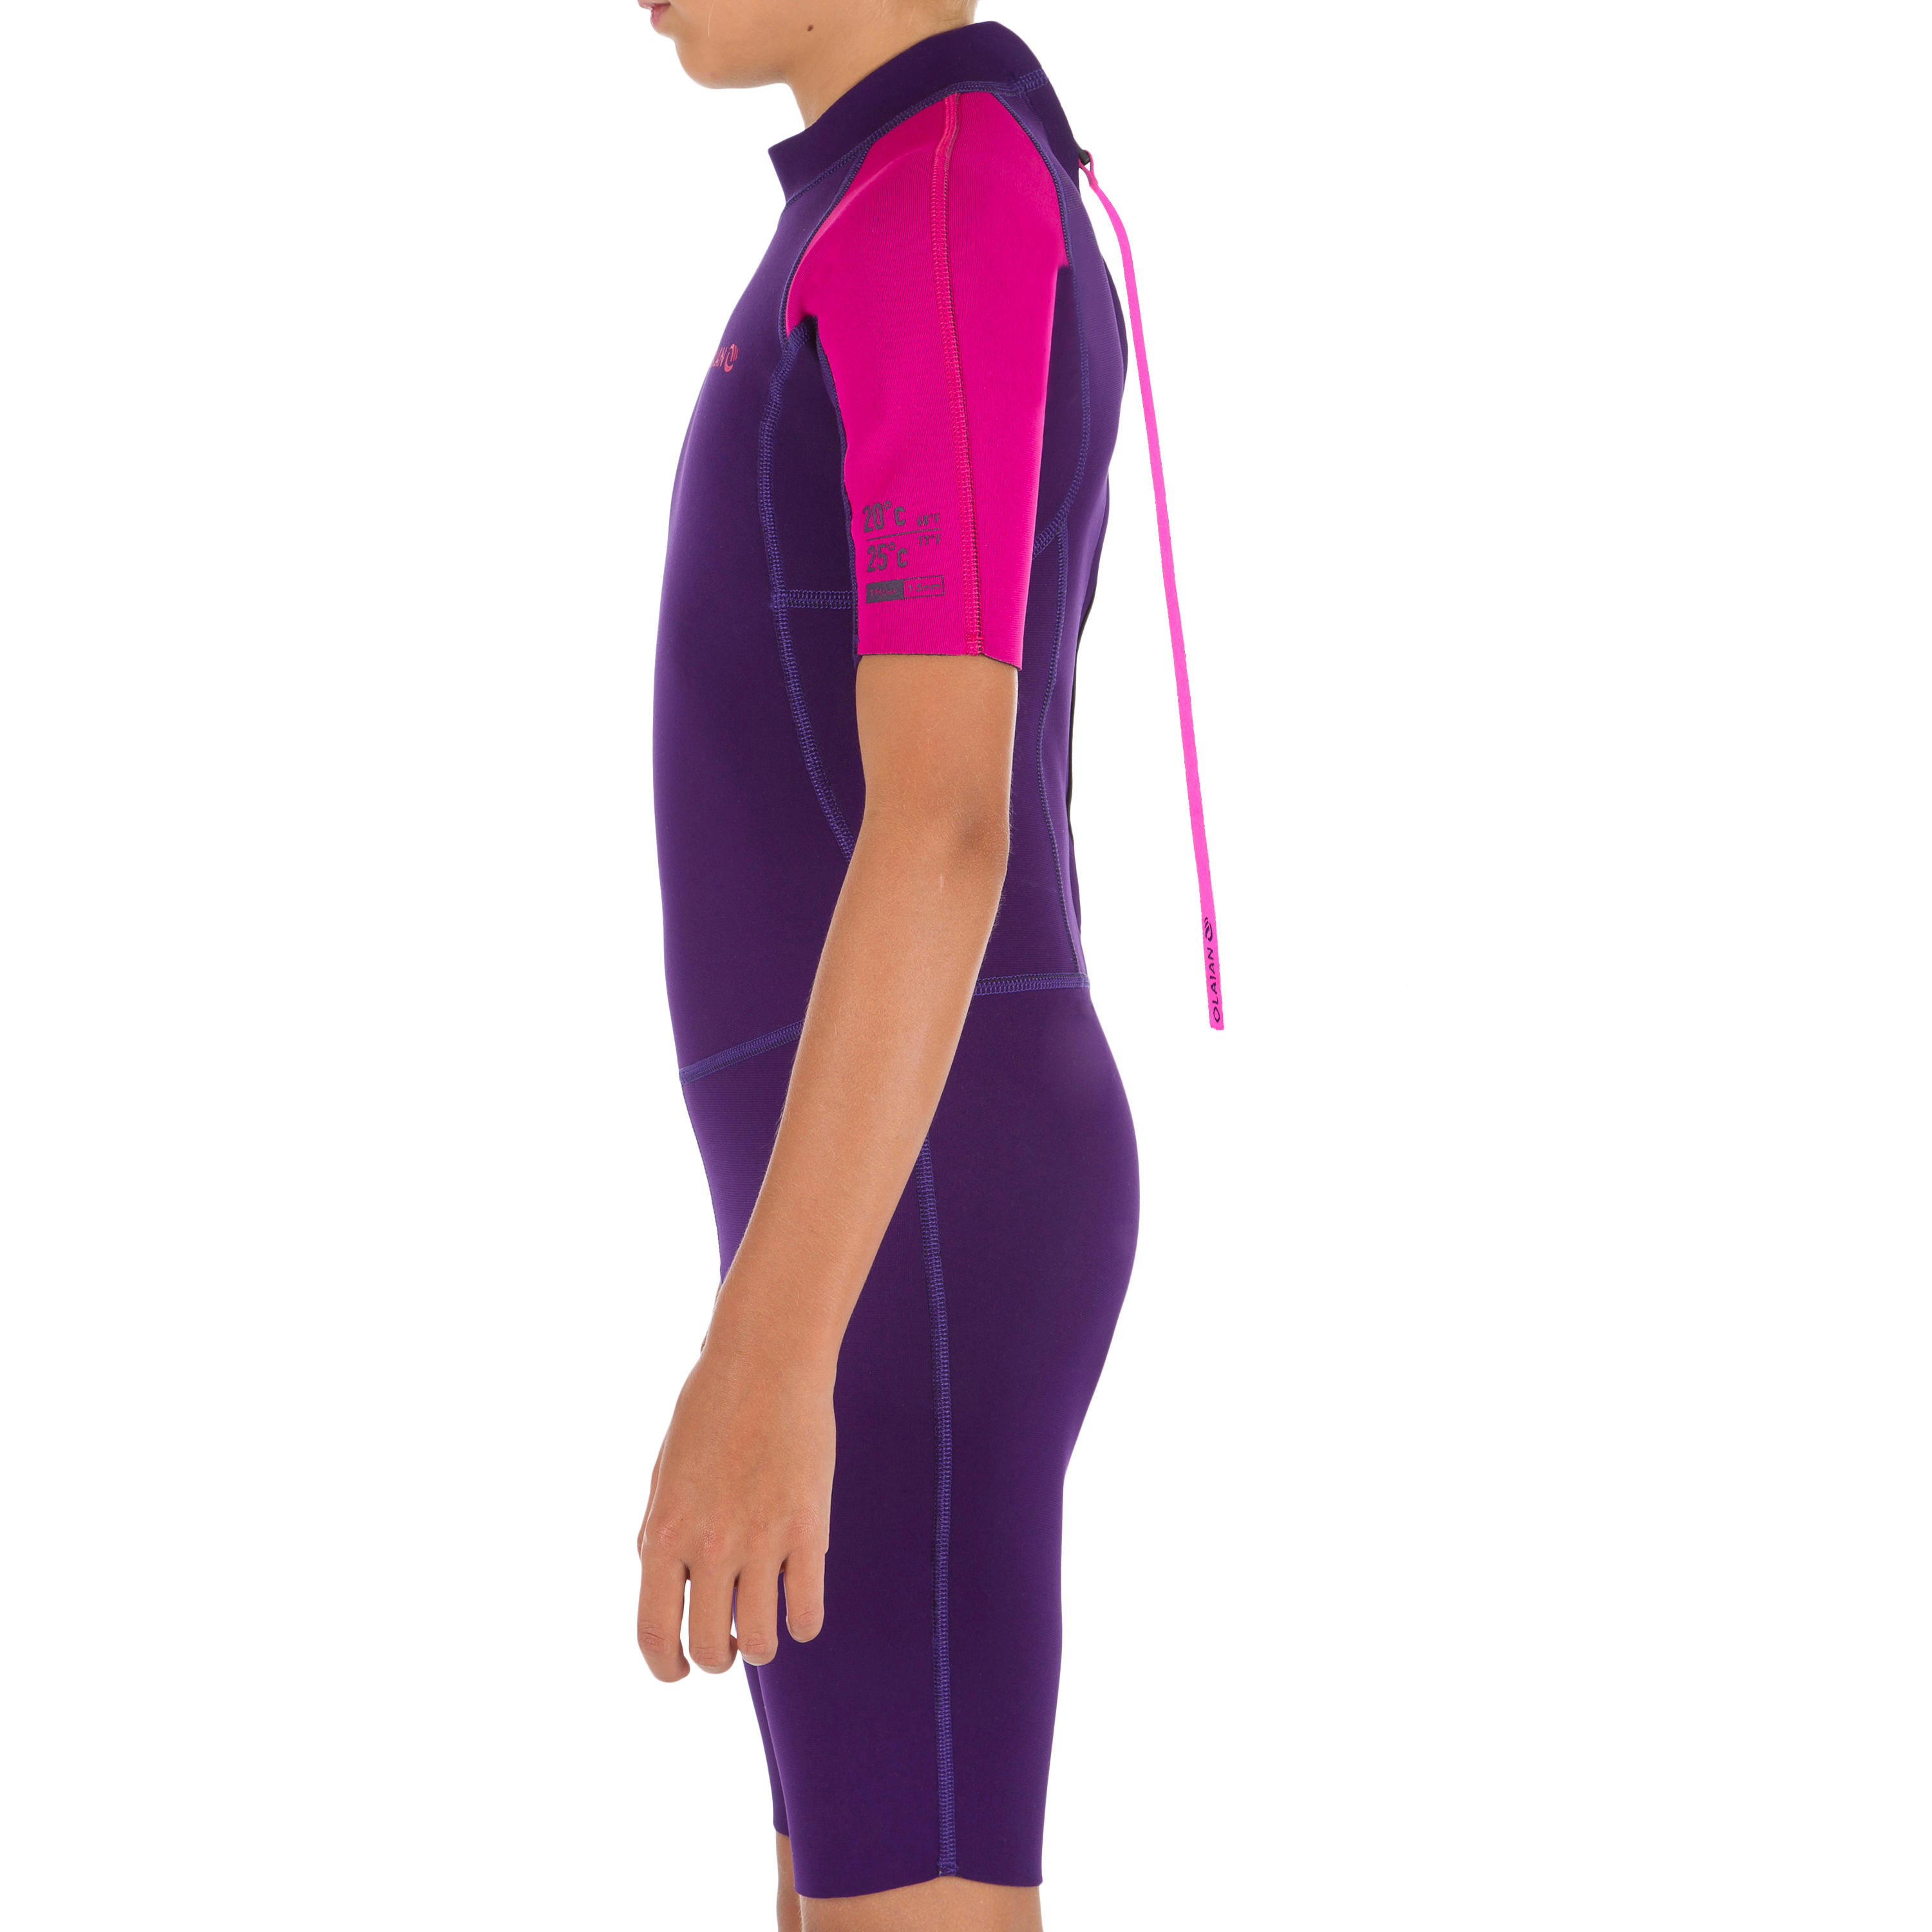 Youth Thick Thermal Swimsuit for Kids, Neoprene Wetsuit, Surfing